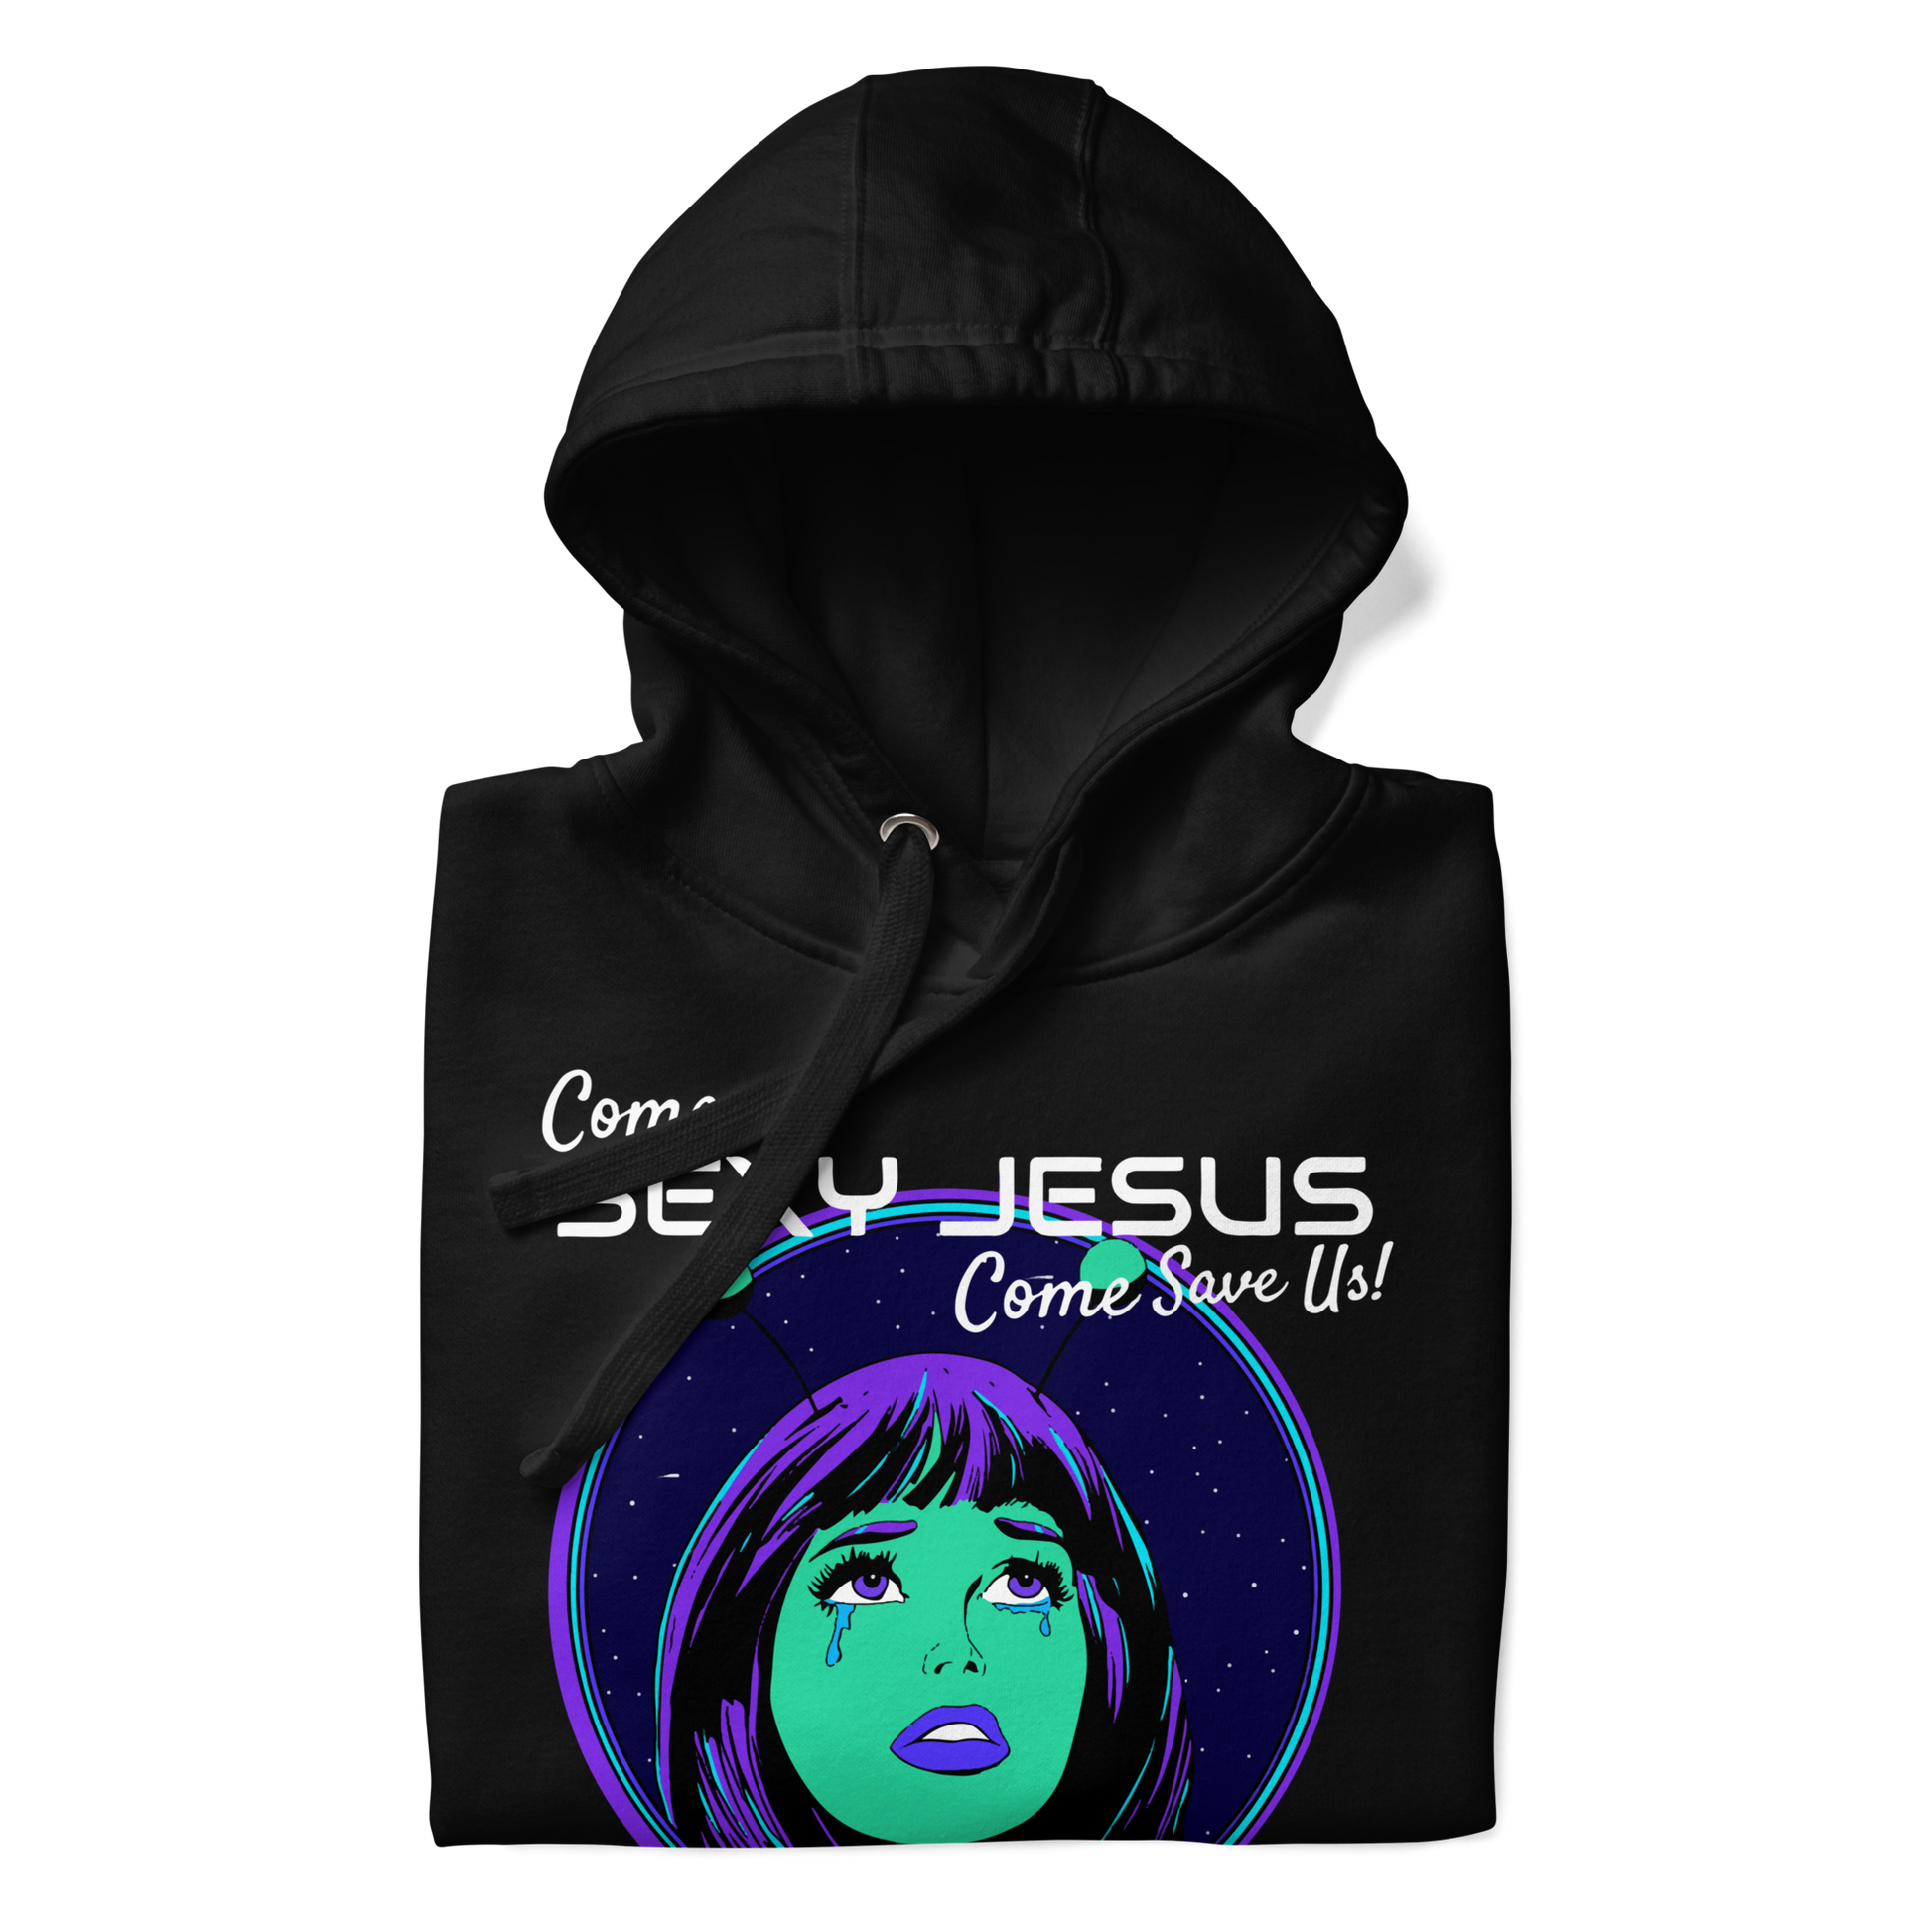 Nerd Alert's "Sexy Jesus" hoodie design folded up, with a purple and green alien girl crying as the main focus.